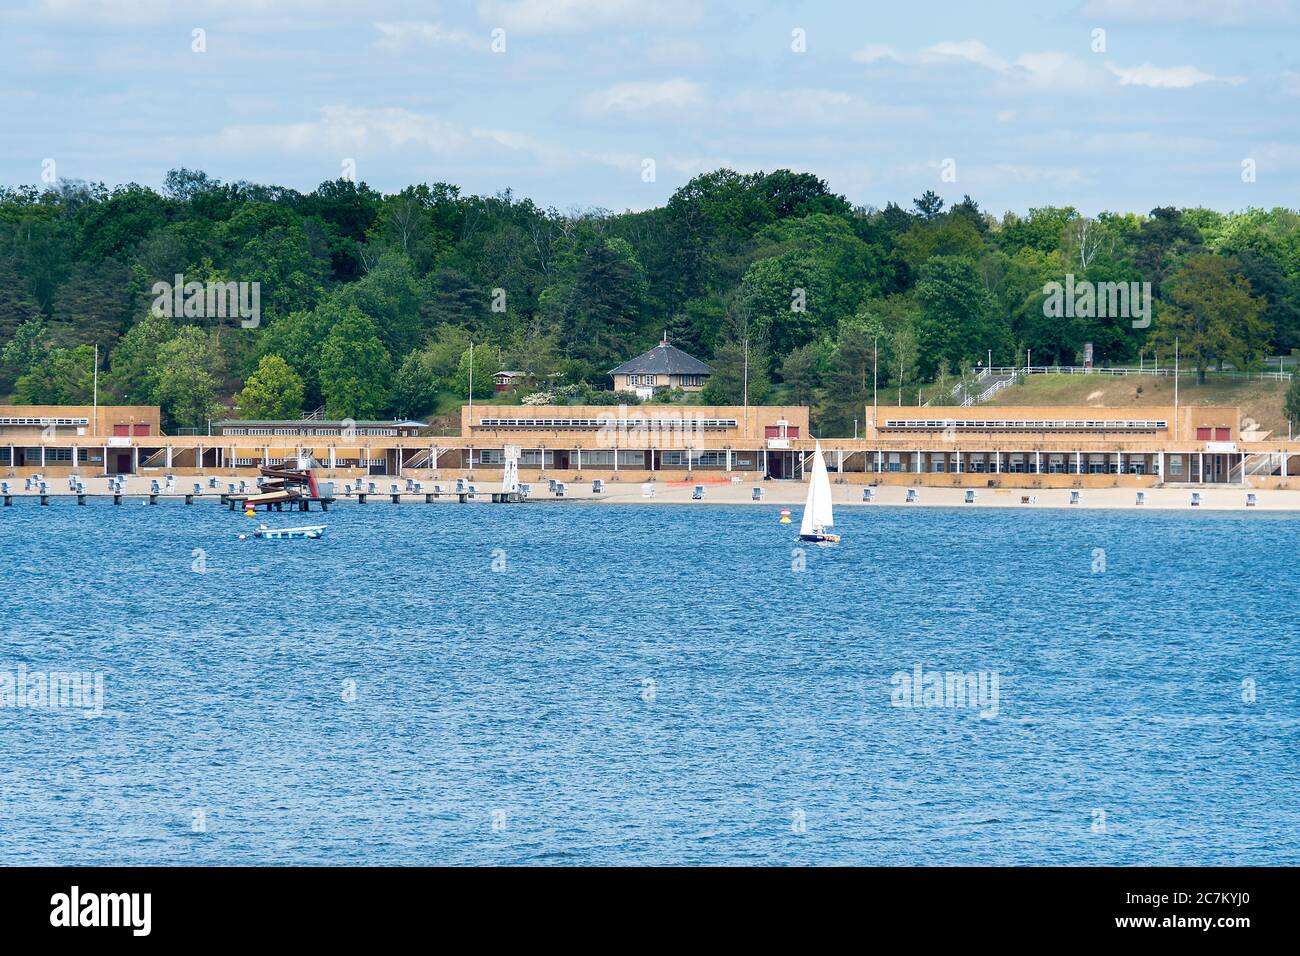 Berlin, Wannsee, Strandbad Wannsee, largest inland outdoor pool in Europe, new practicality Stock Photo